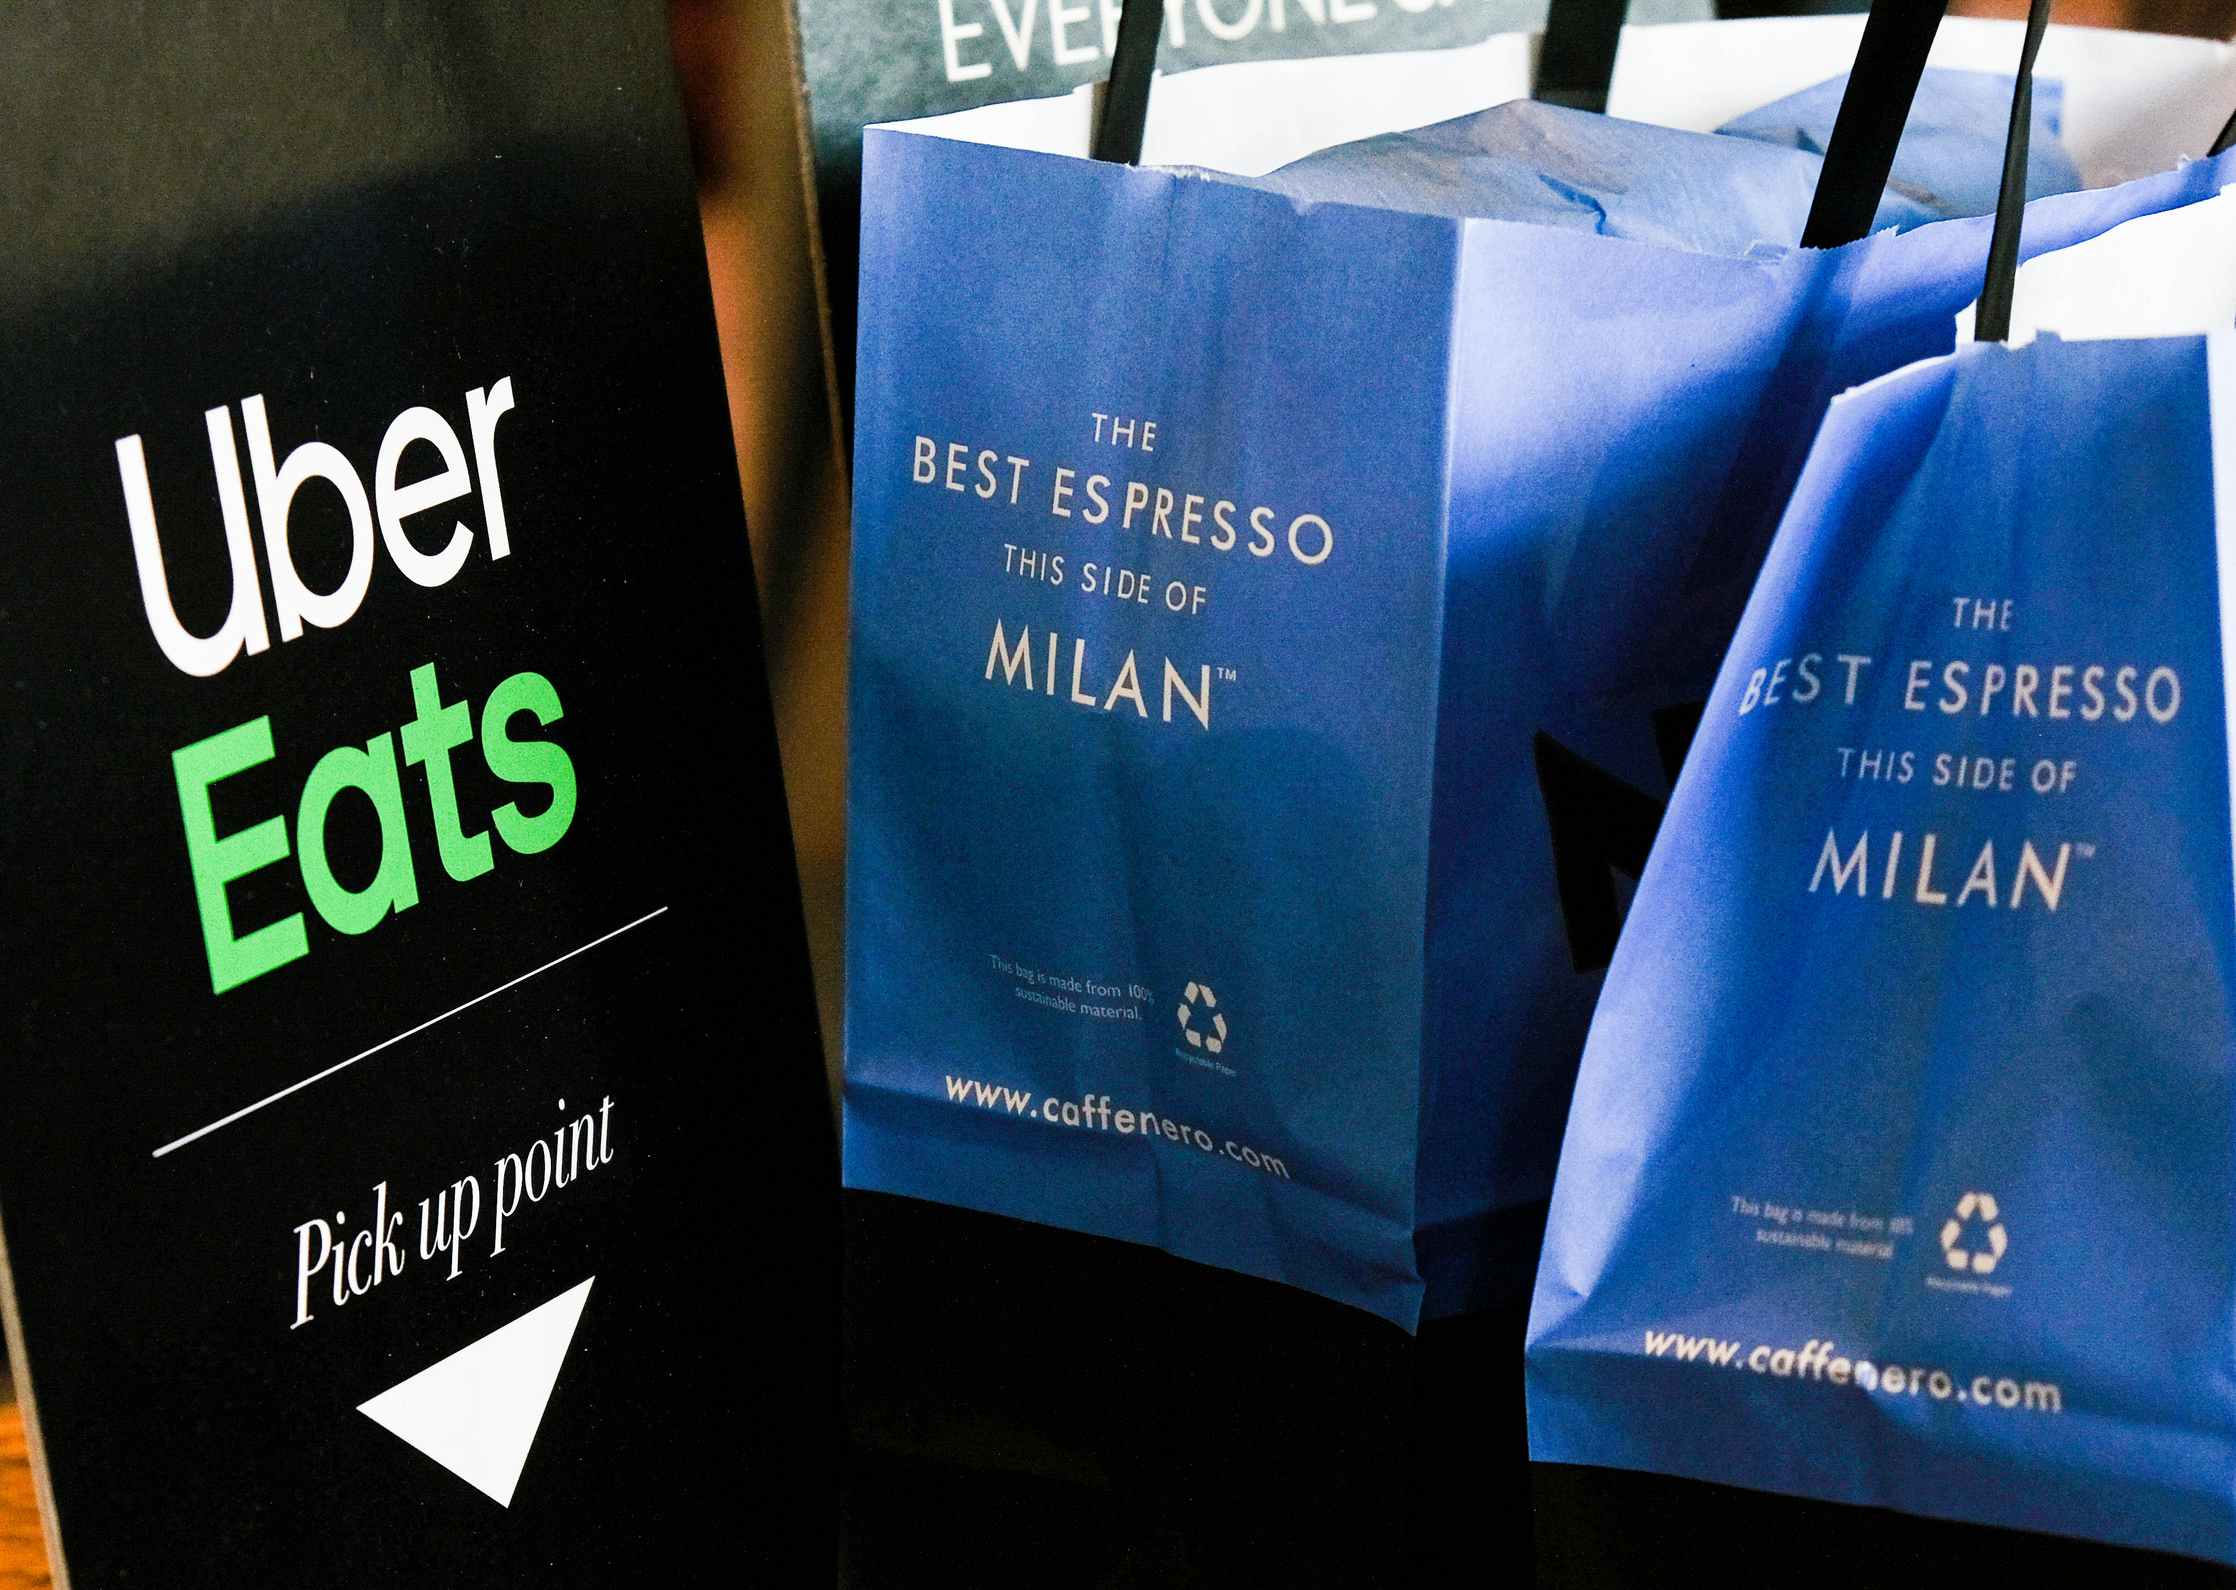 An Uber Eats sign next to two bags from Caffe Nero in Milan next to it